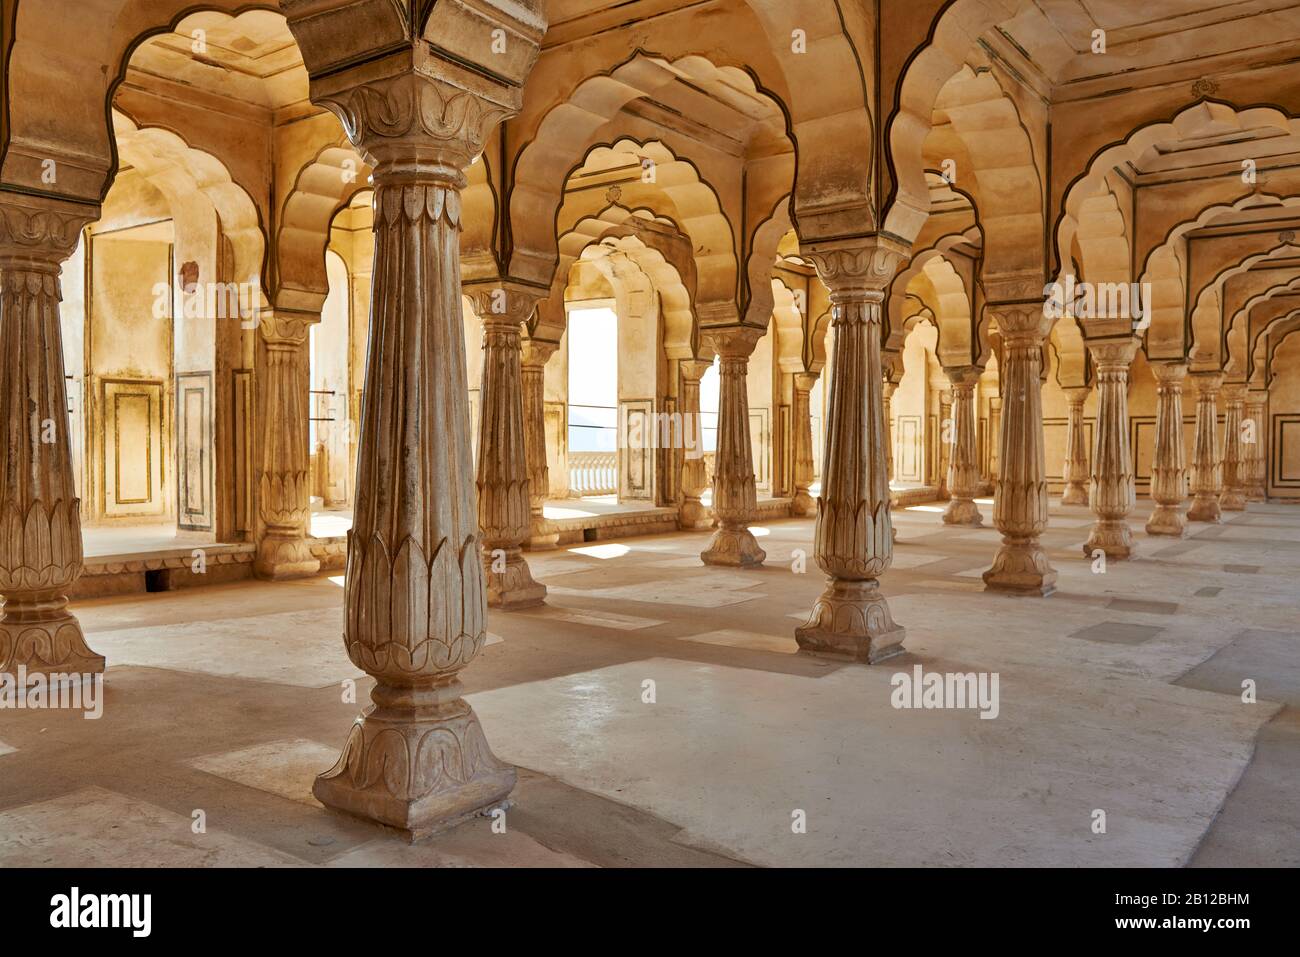 Colonne in Amer Fort, Jaipur, Rajasthan, India Foto Stock